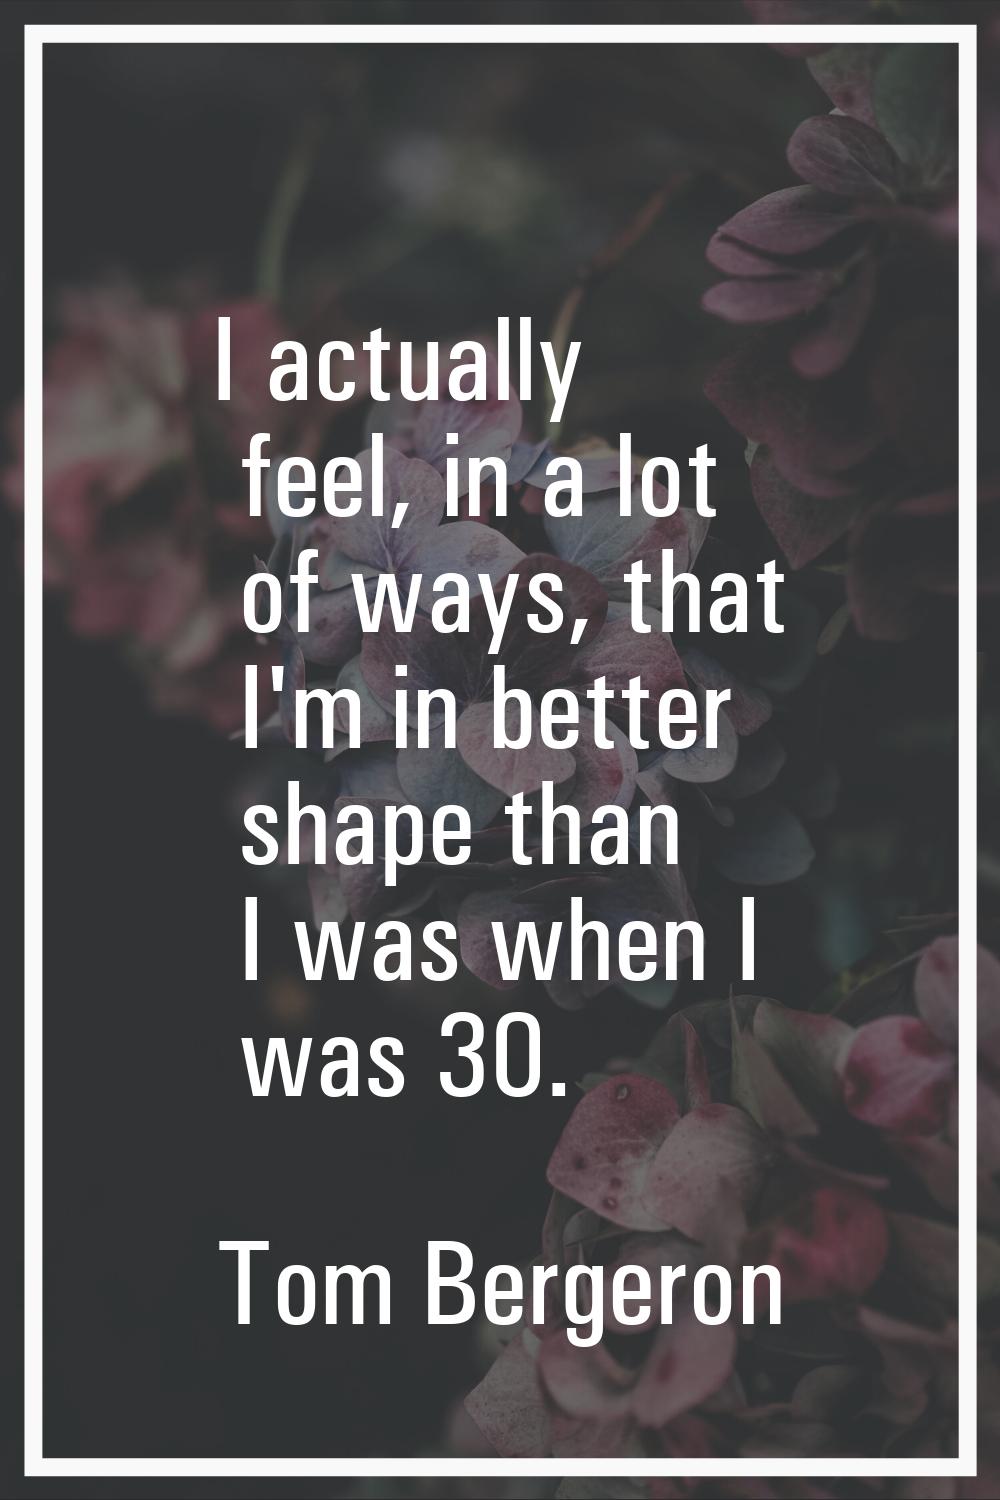 I actually feel, in a lot of ways, that I'm in better shape than I was when I was 30.